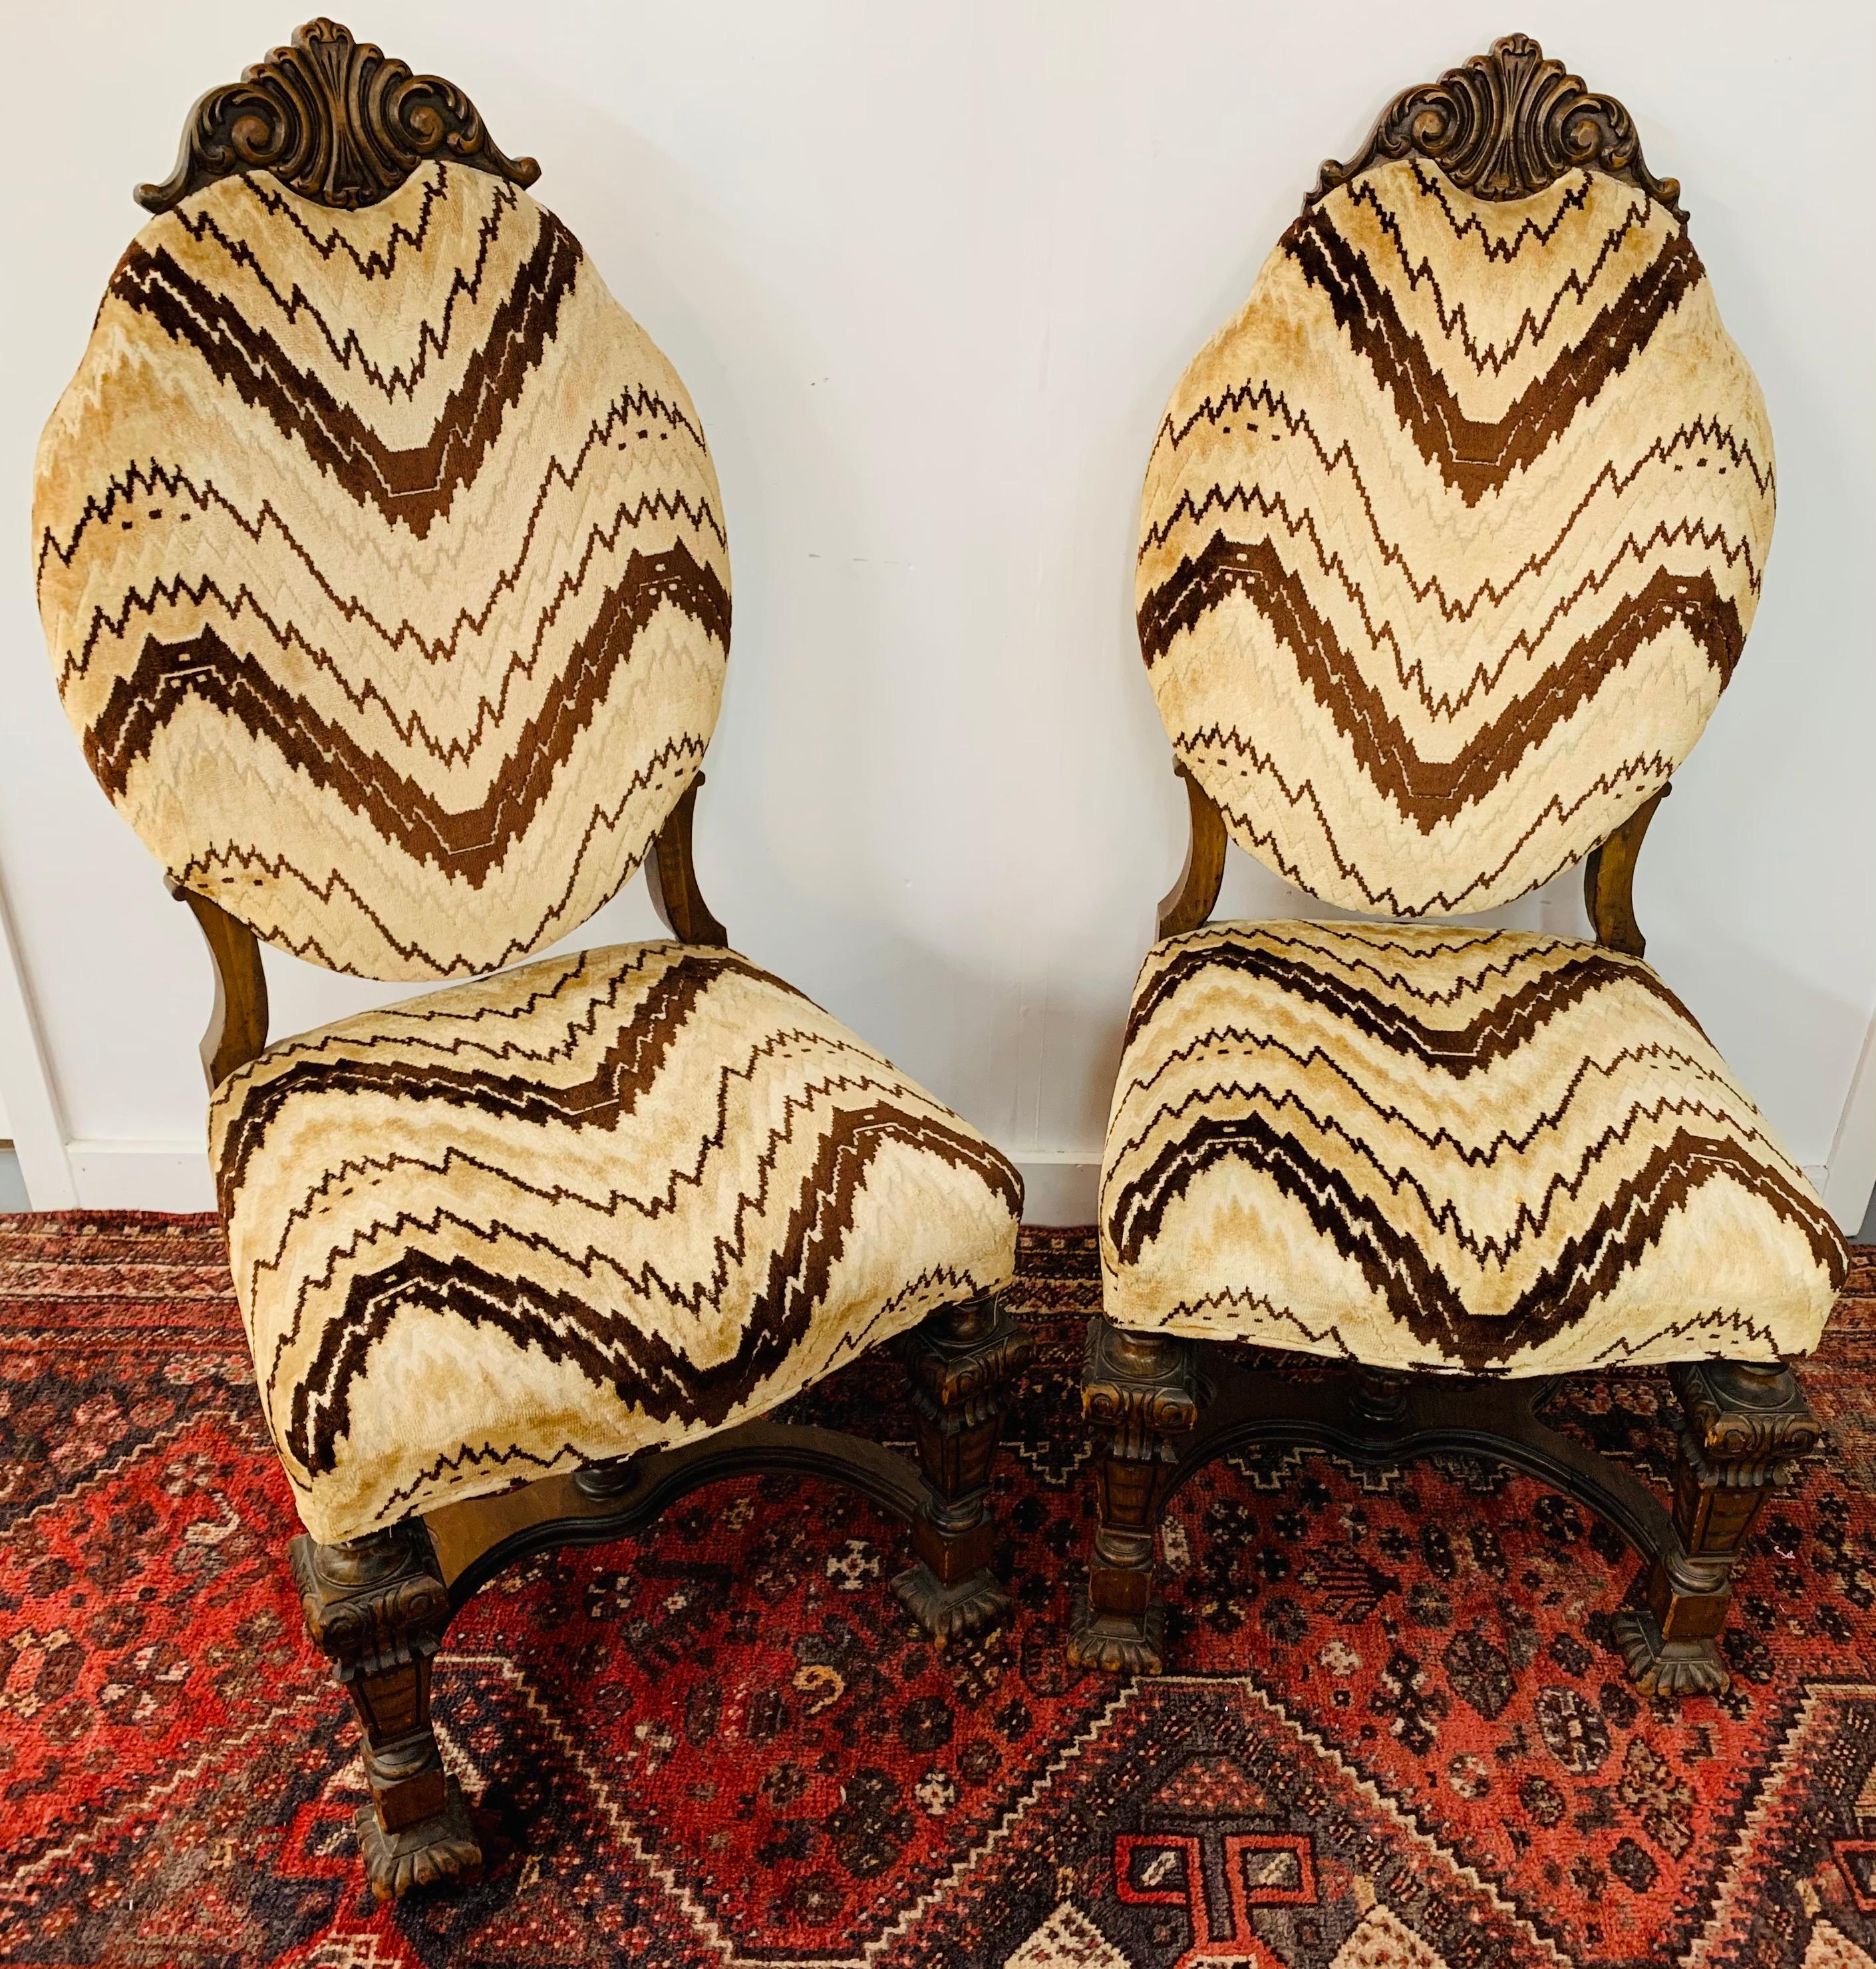 A unique pair of early 20th century gothic renaissance side chairs featuring boldly carved paw feet and original chevron striped upholstery in a classy beige and brown. The chairs are finely hand carved of oakwood and display classy craving